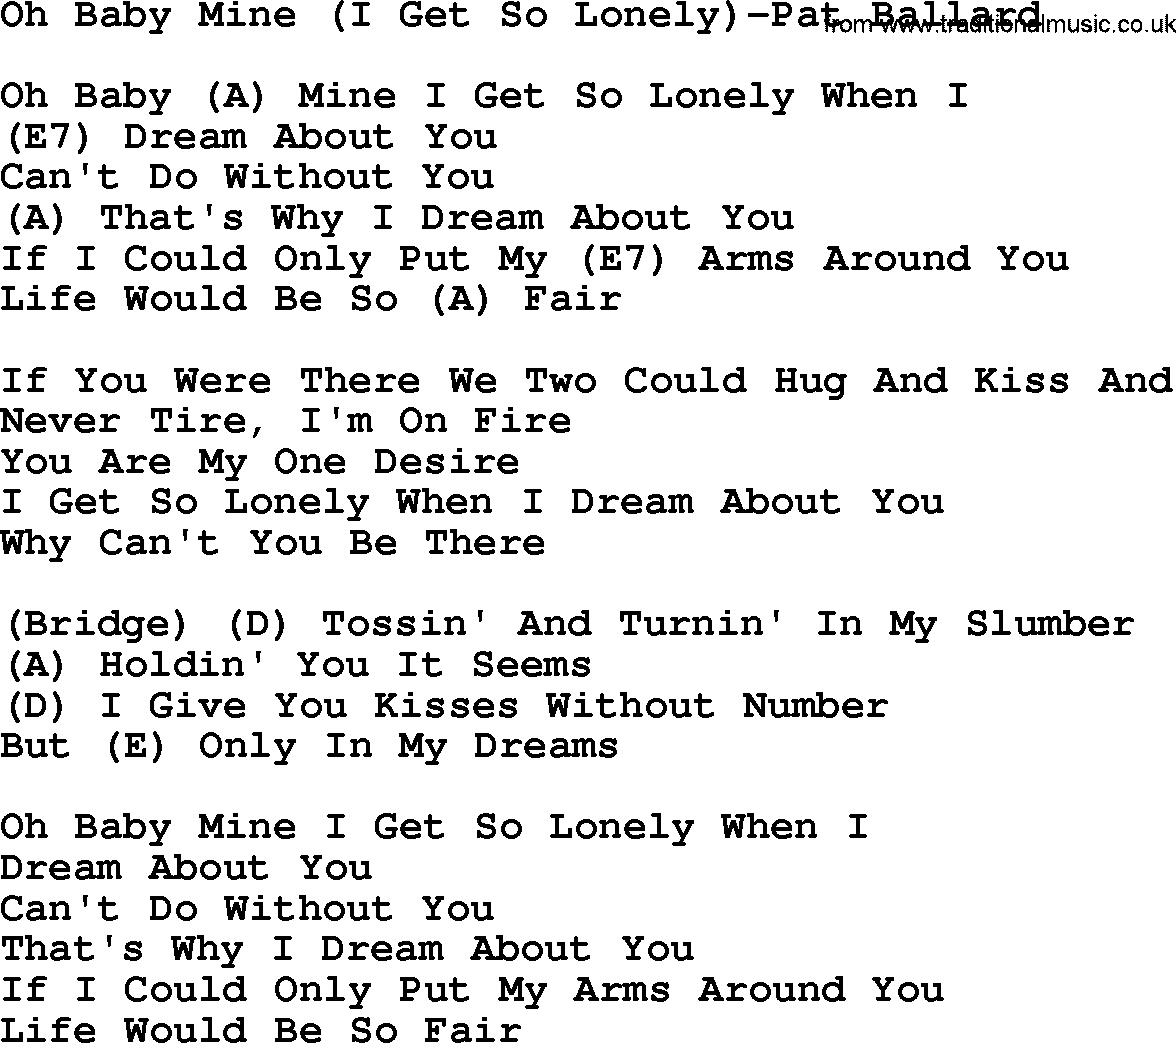 Country music song: Oh Baby Mine(I Get So Lonely)-Pat Ballard lyrics and chords